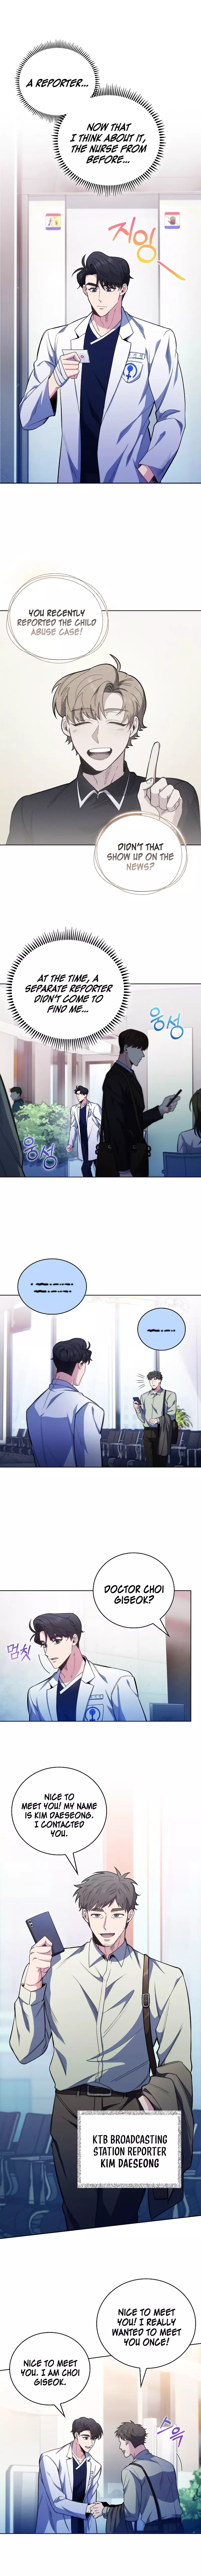 Level-Up Doctor (Manhwa) - 46 page 2-16bd385c